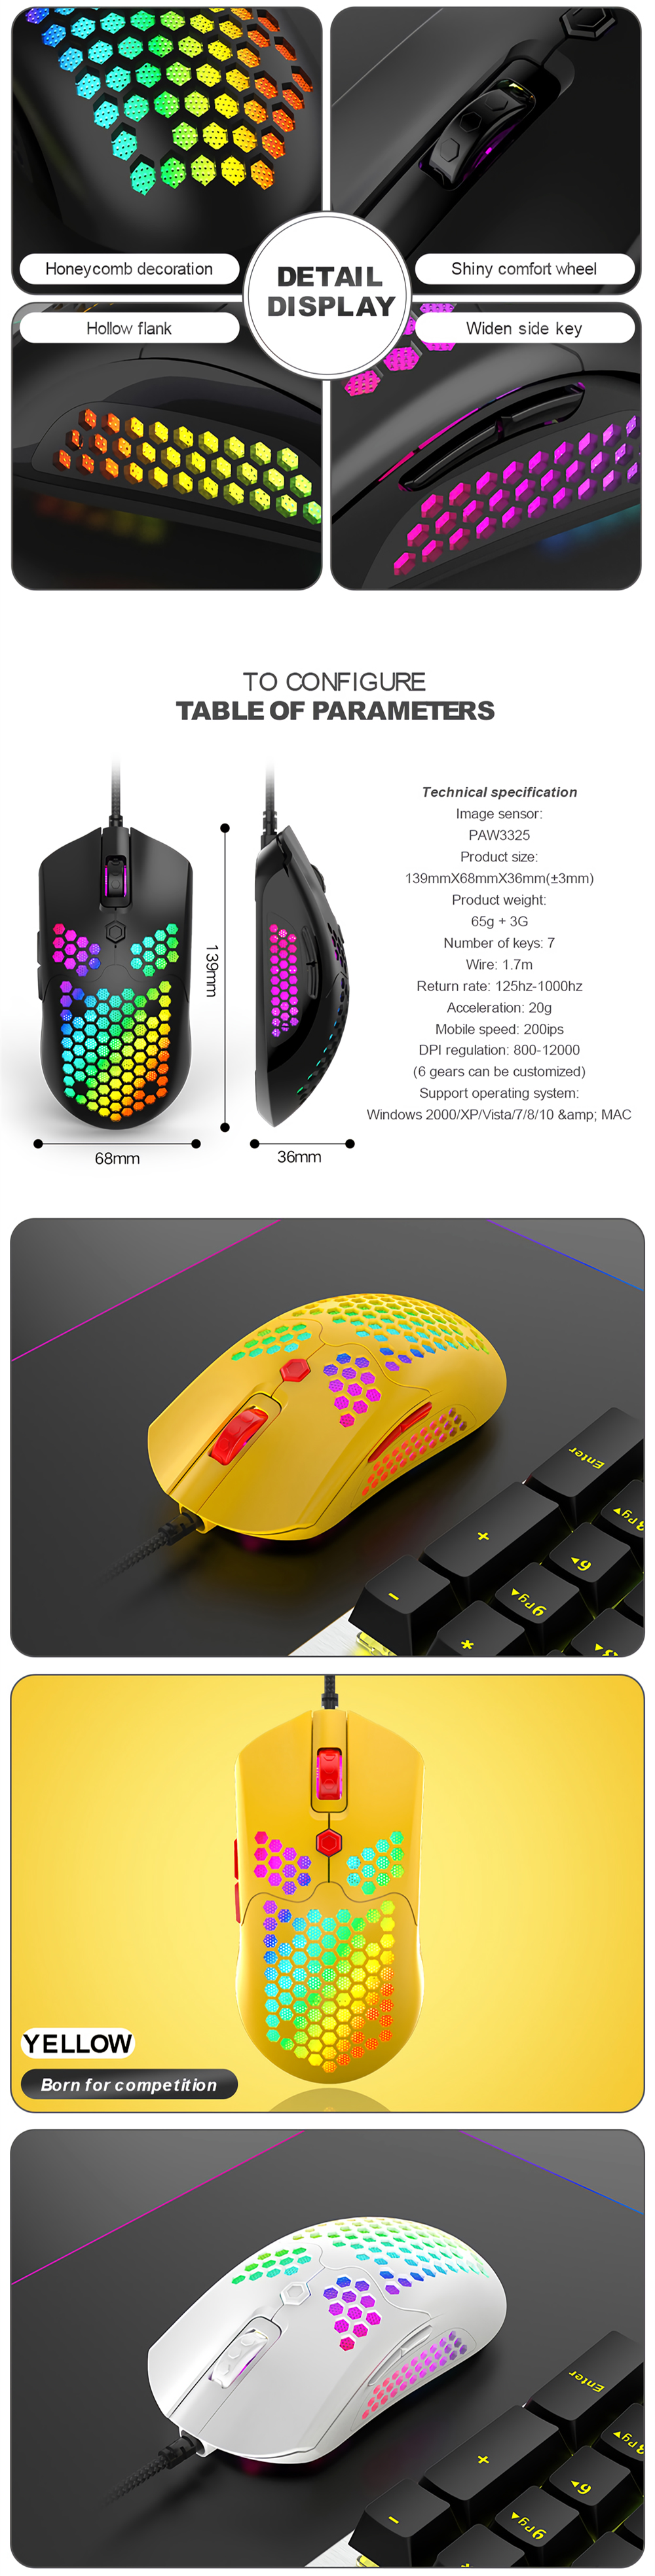 Free-wolf M5 Wired Game Mouse Breathing RGB Colorful Hollow Honeycomb Shape 12000DPI Gaming Mouse USB Wired Gamer Mice for Desktop Computer Laptop PC 4